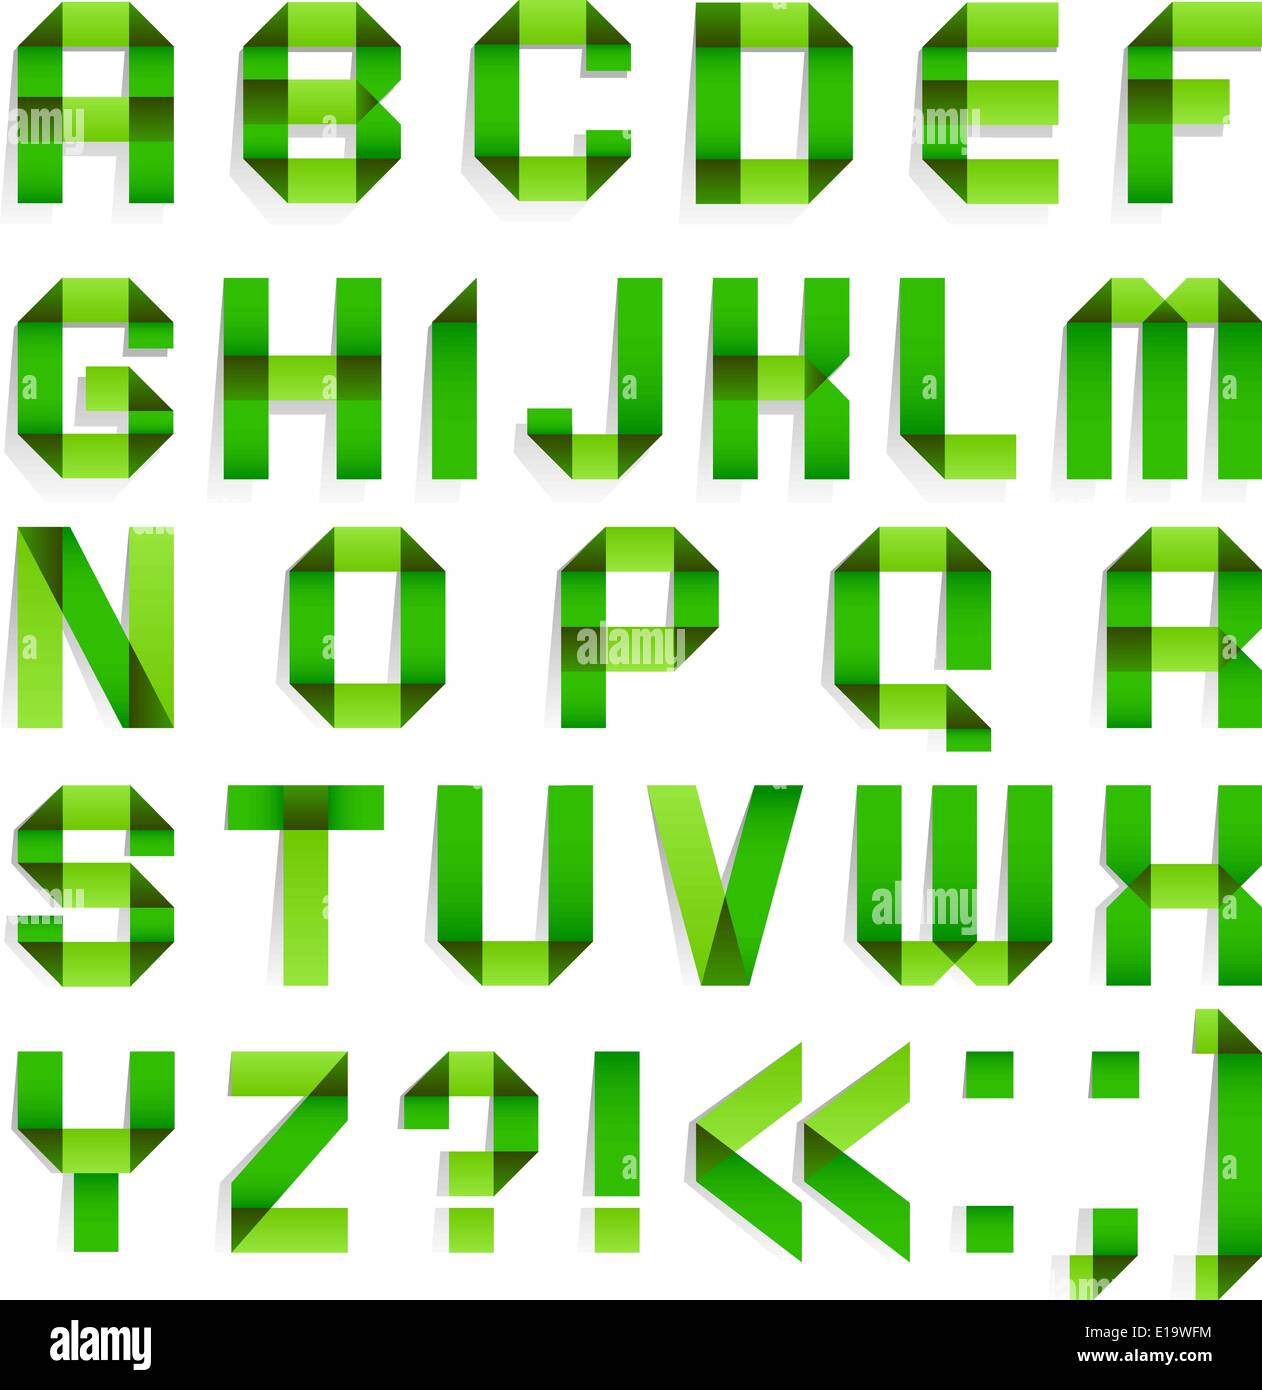 Alphabet folded paper - Green letters. Roman alphabet (A, B, C, D, E, F, G, H, I, J, K, L, M, N, O, P, Q, R, S, T, U, V, W, X, Y Stock Vector